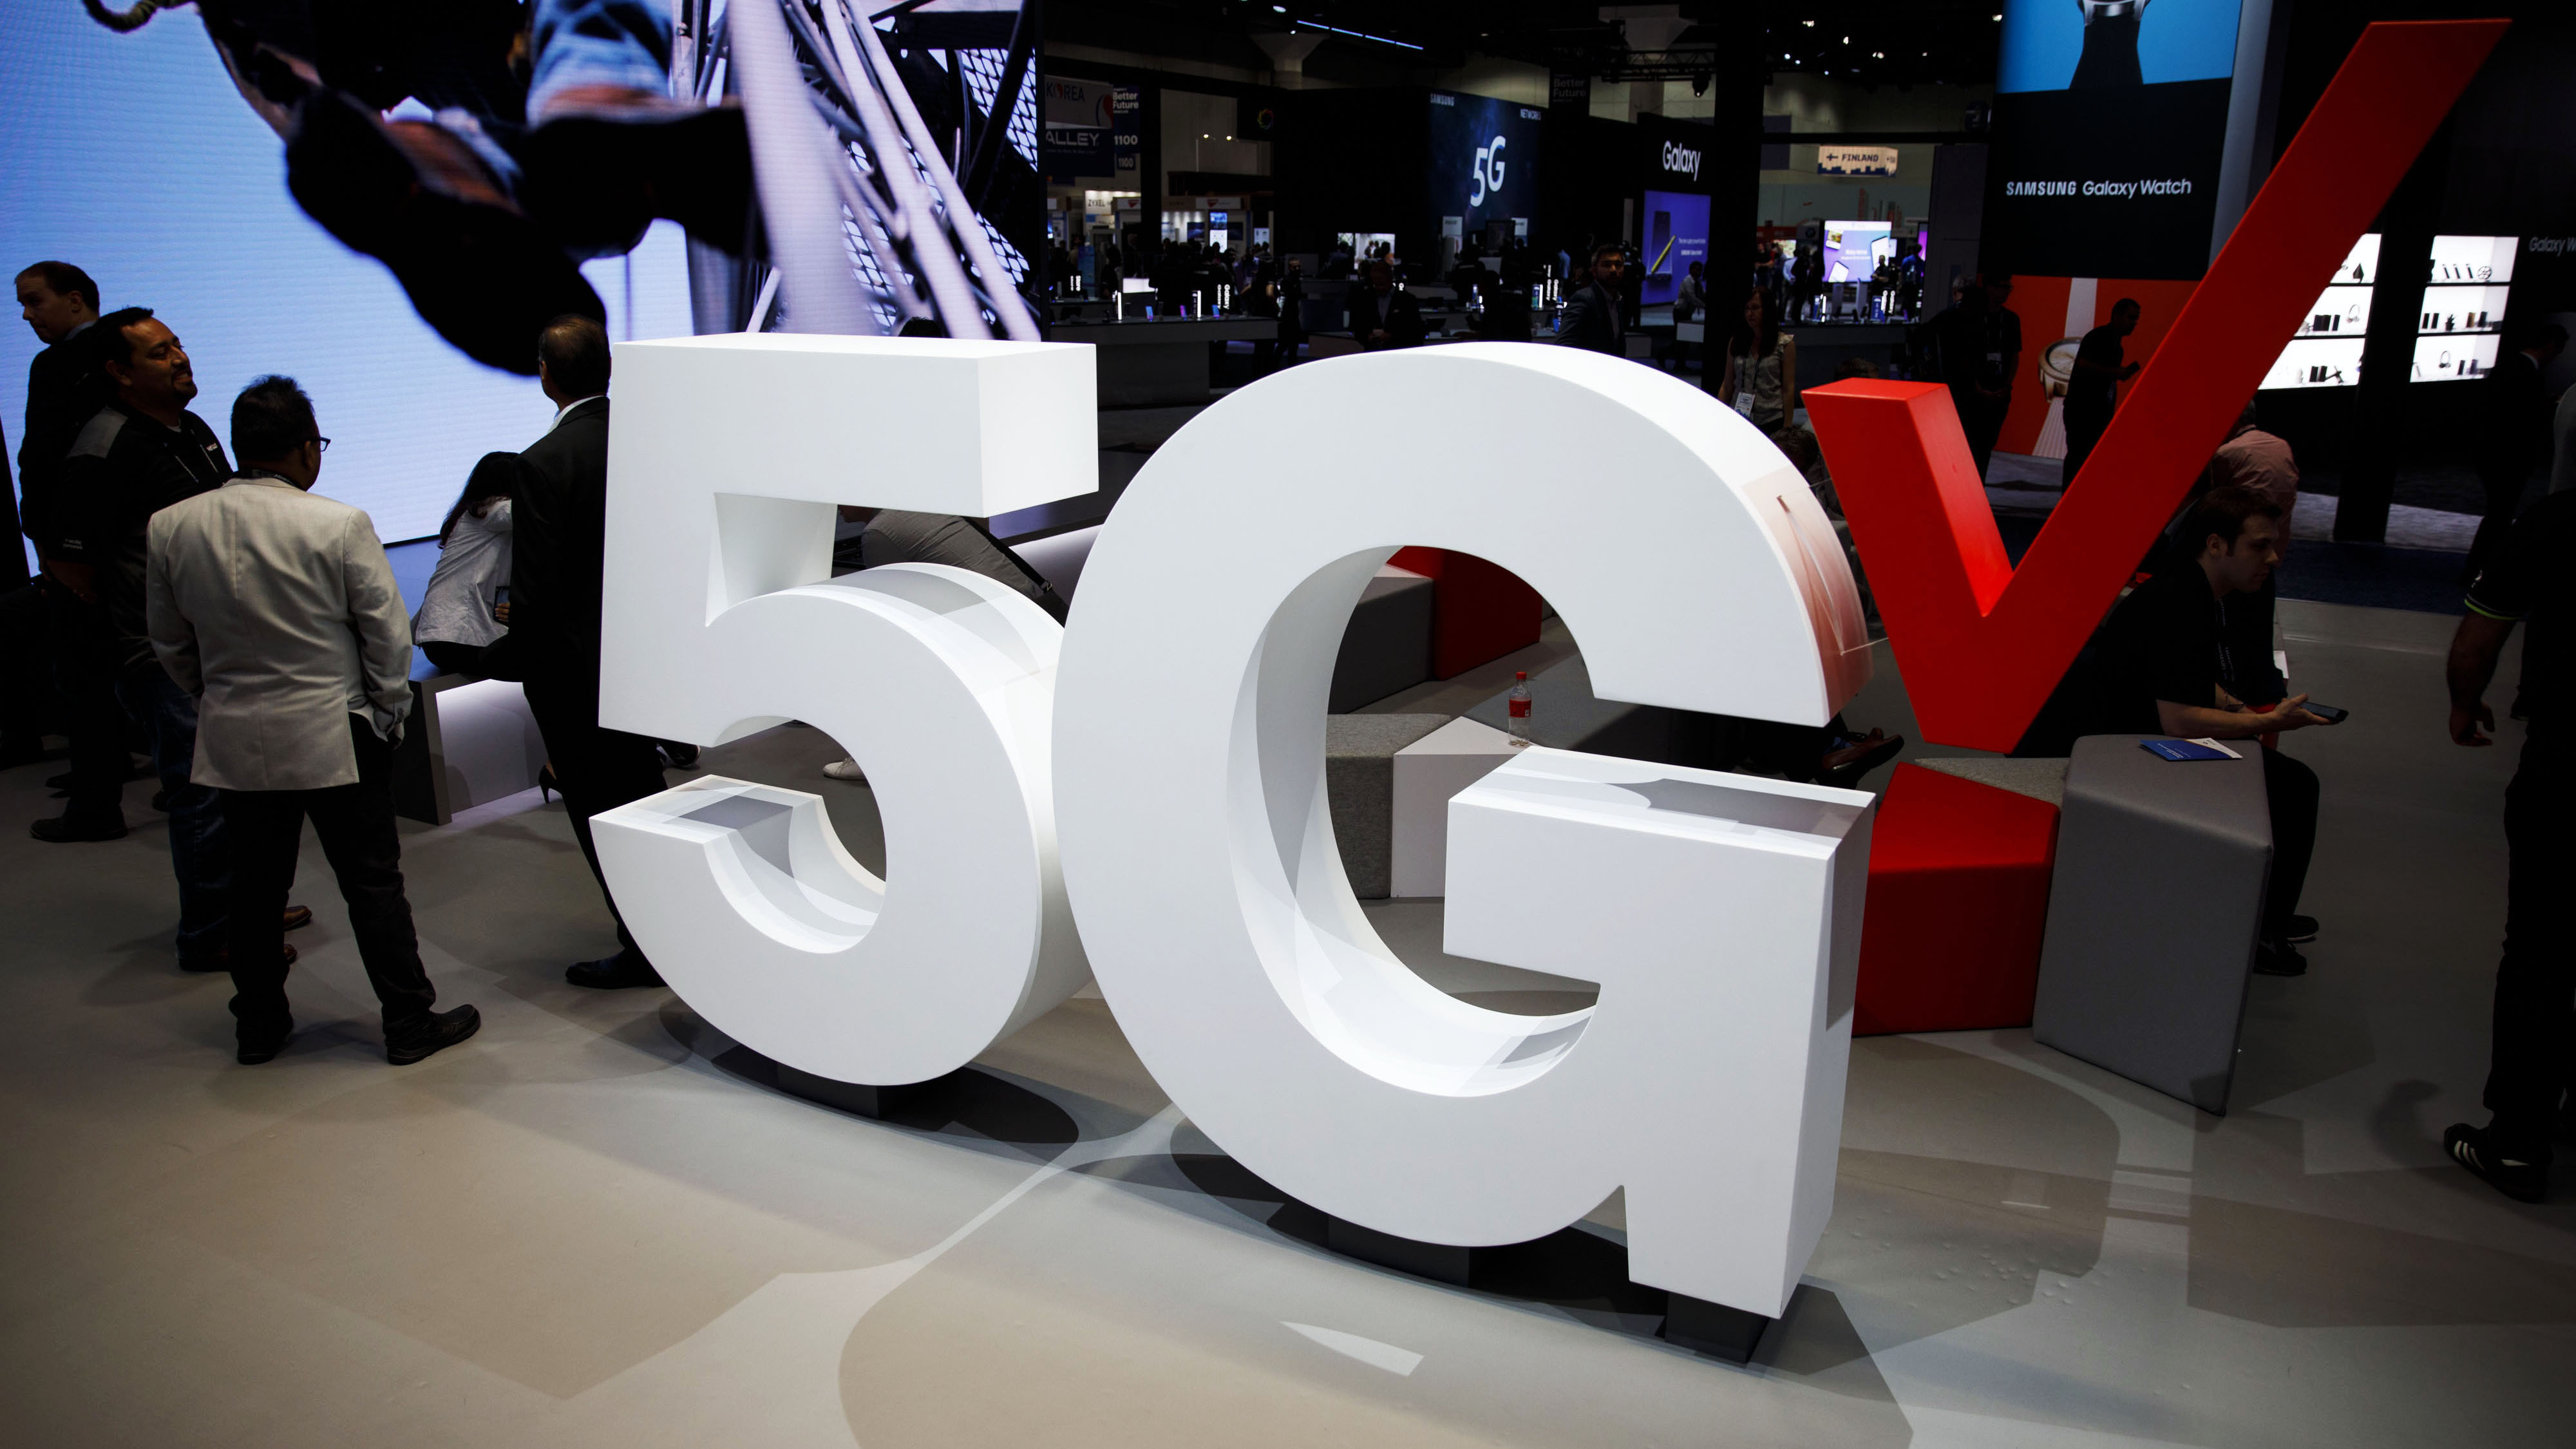 Verizon 5G Rollout Two Years Ahead of Schedule, CEO Says Bloomberg